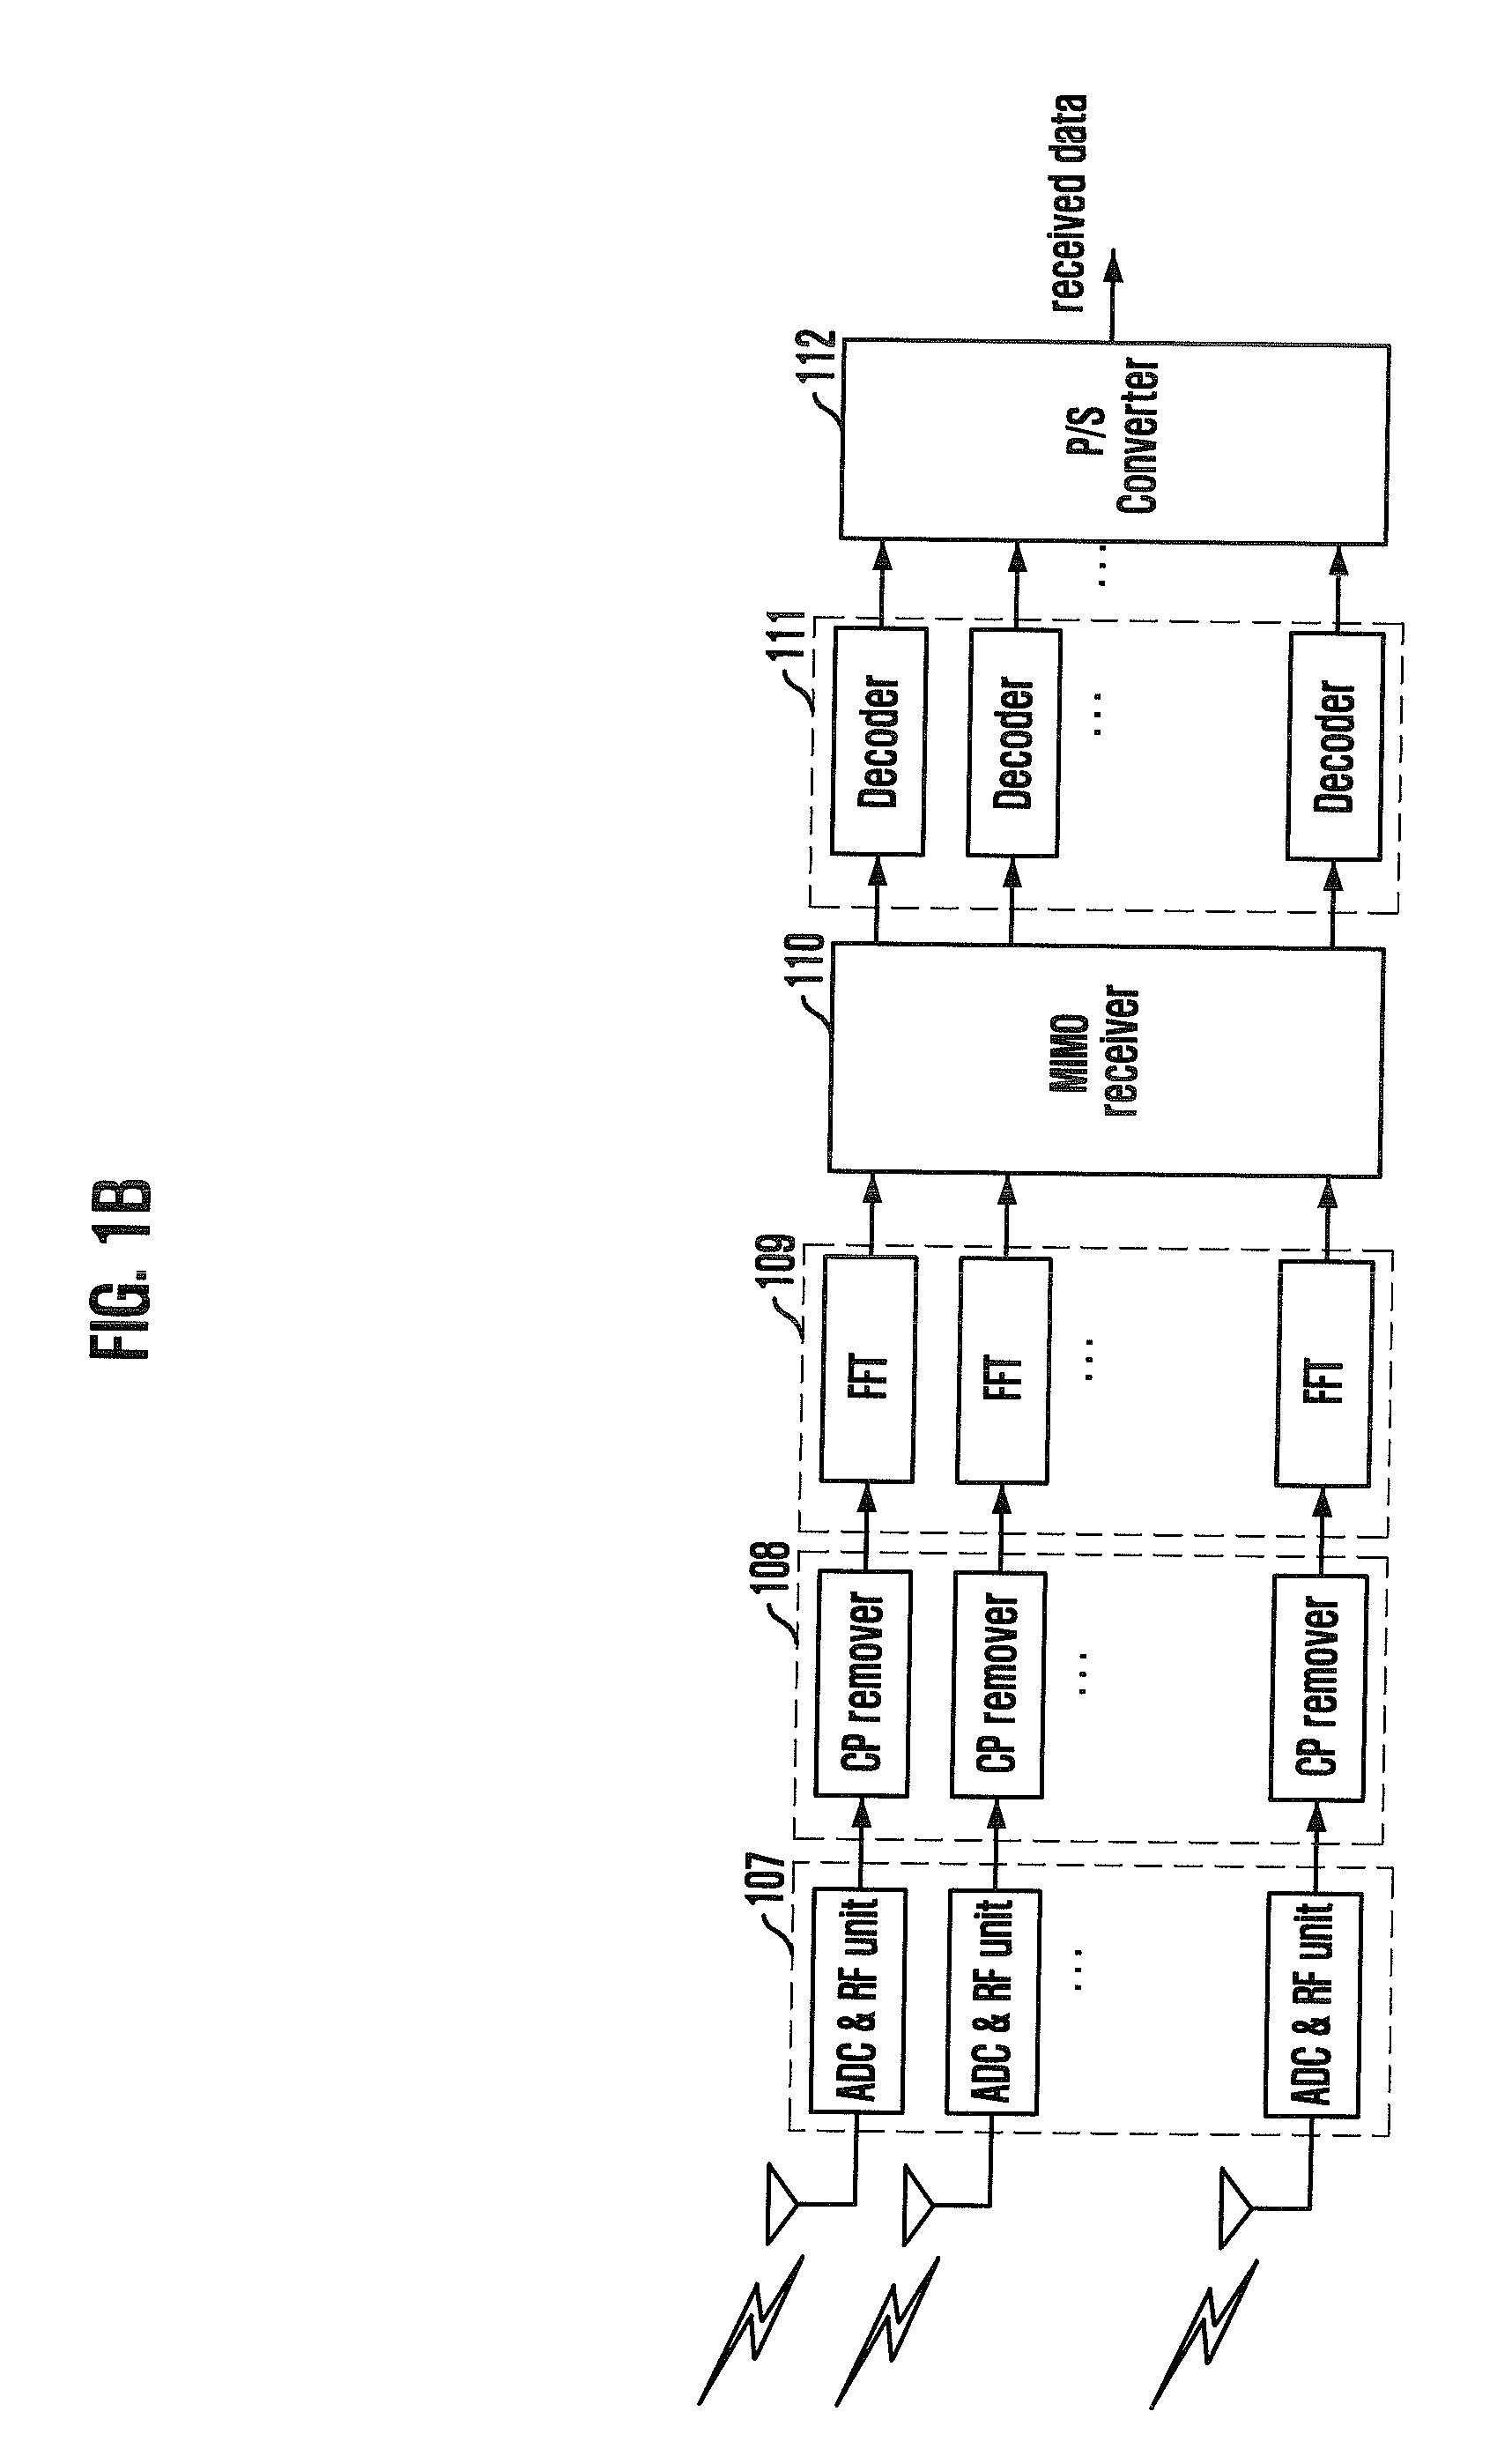 Qr decomposition apparatus and method for MIMO system